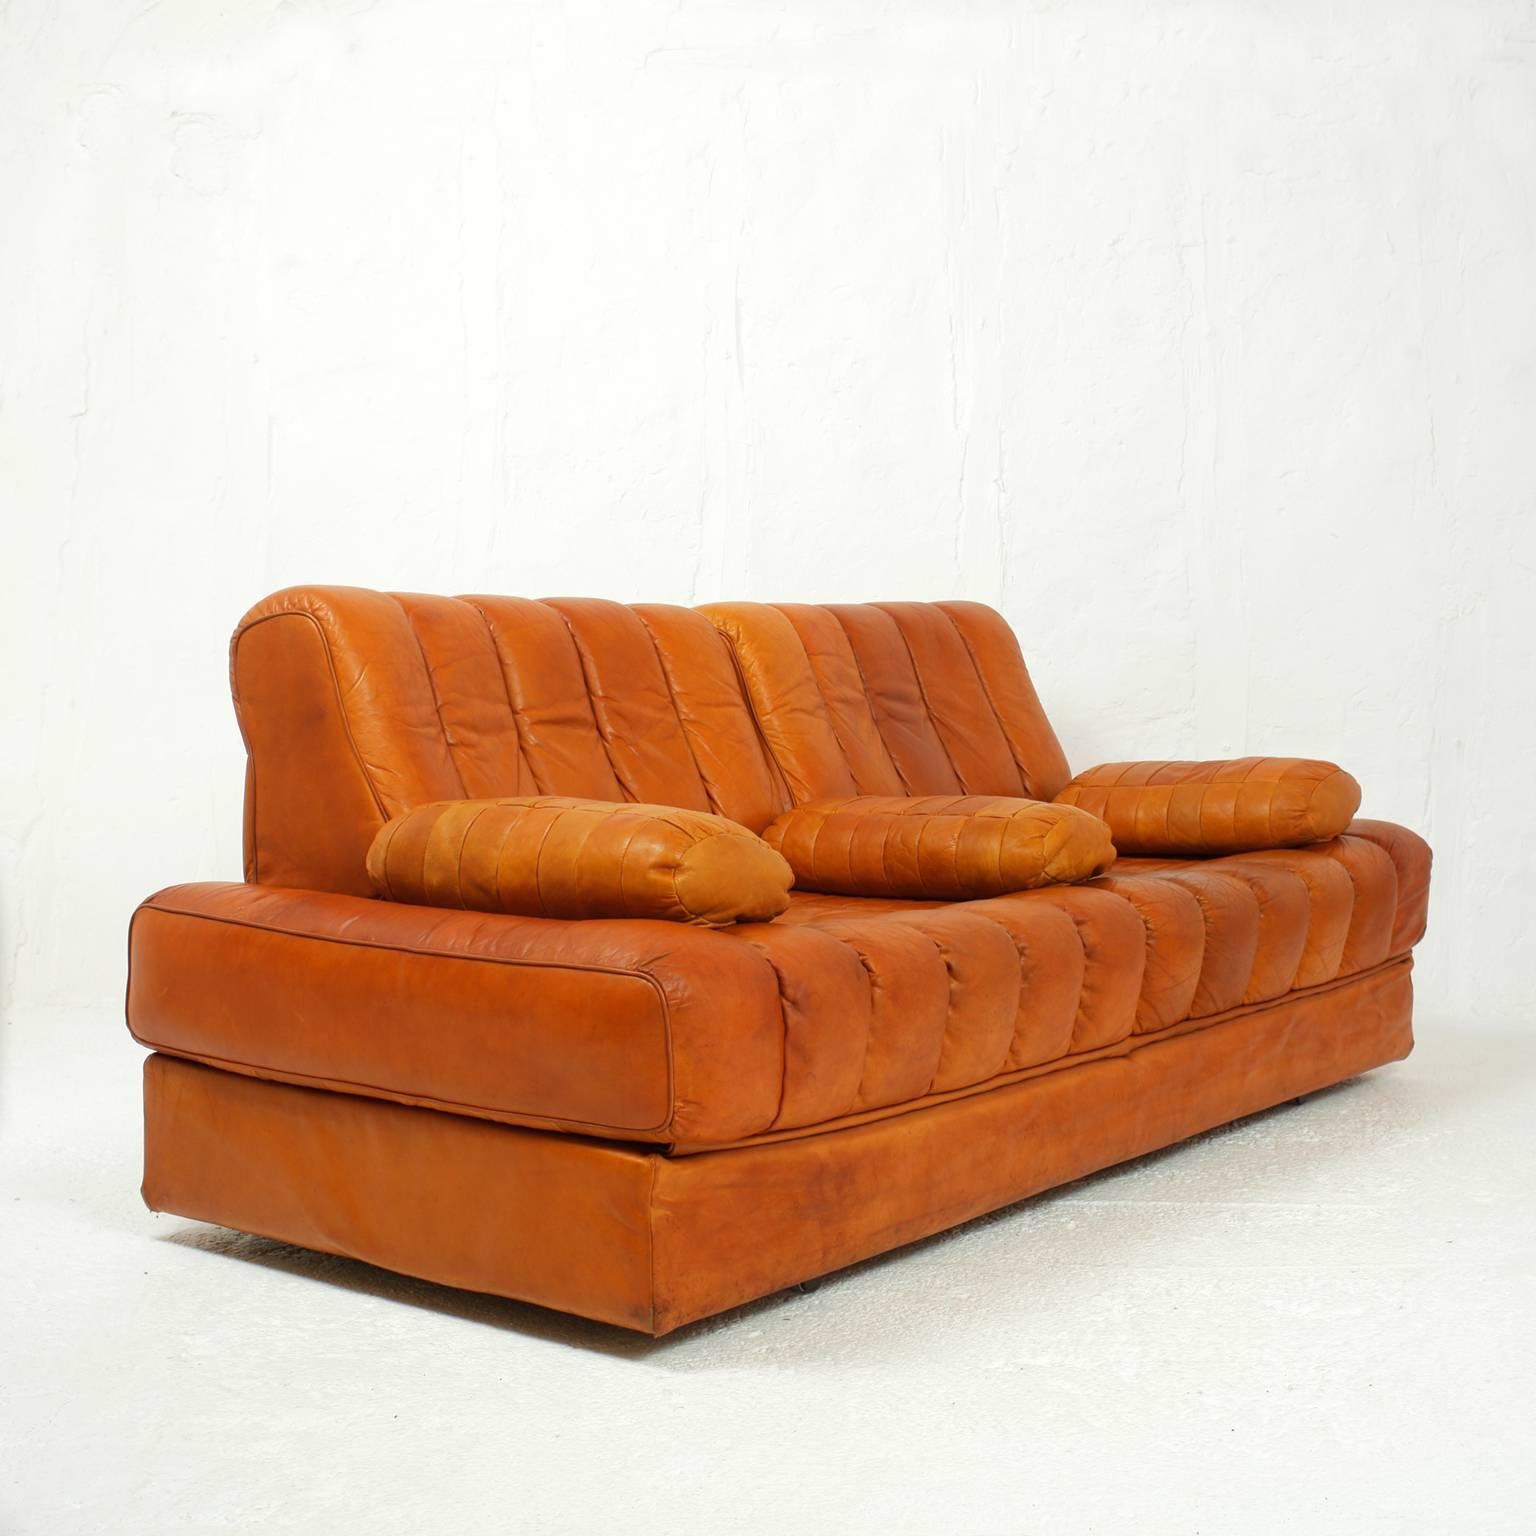 Cognac leather sofa from De Sede made in Switzerland, the DS 85 is convertible into a double bed.
Leather with nice patina, no more manufactured.
Three patchwork cushions.